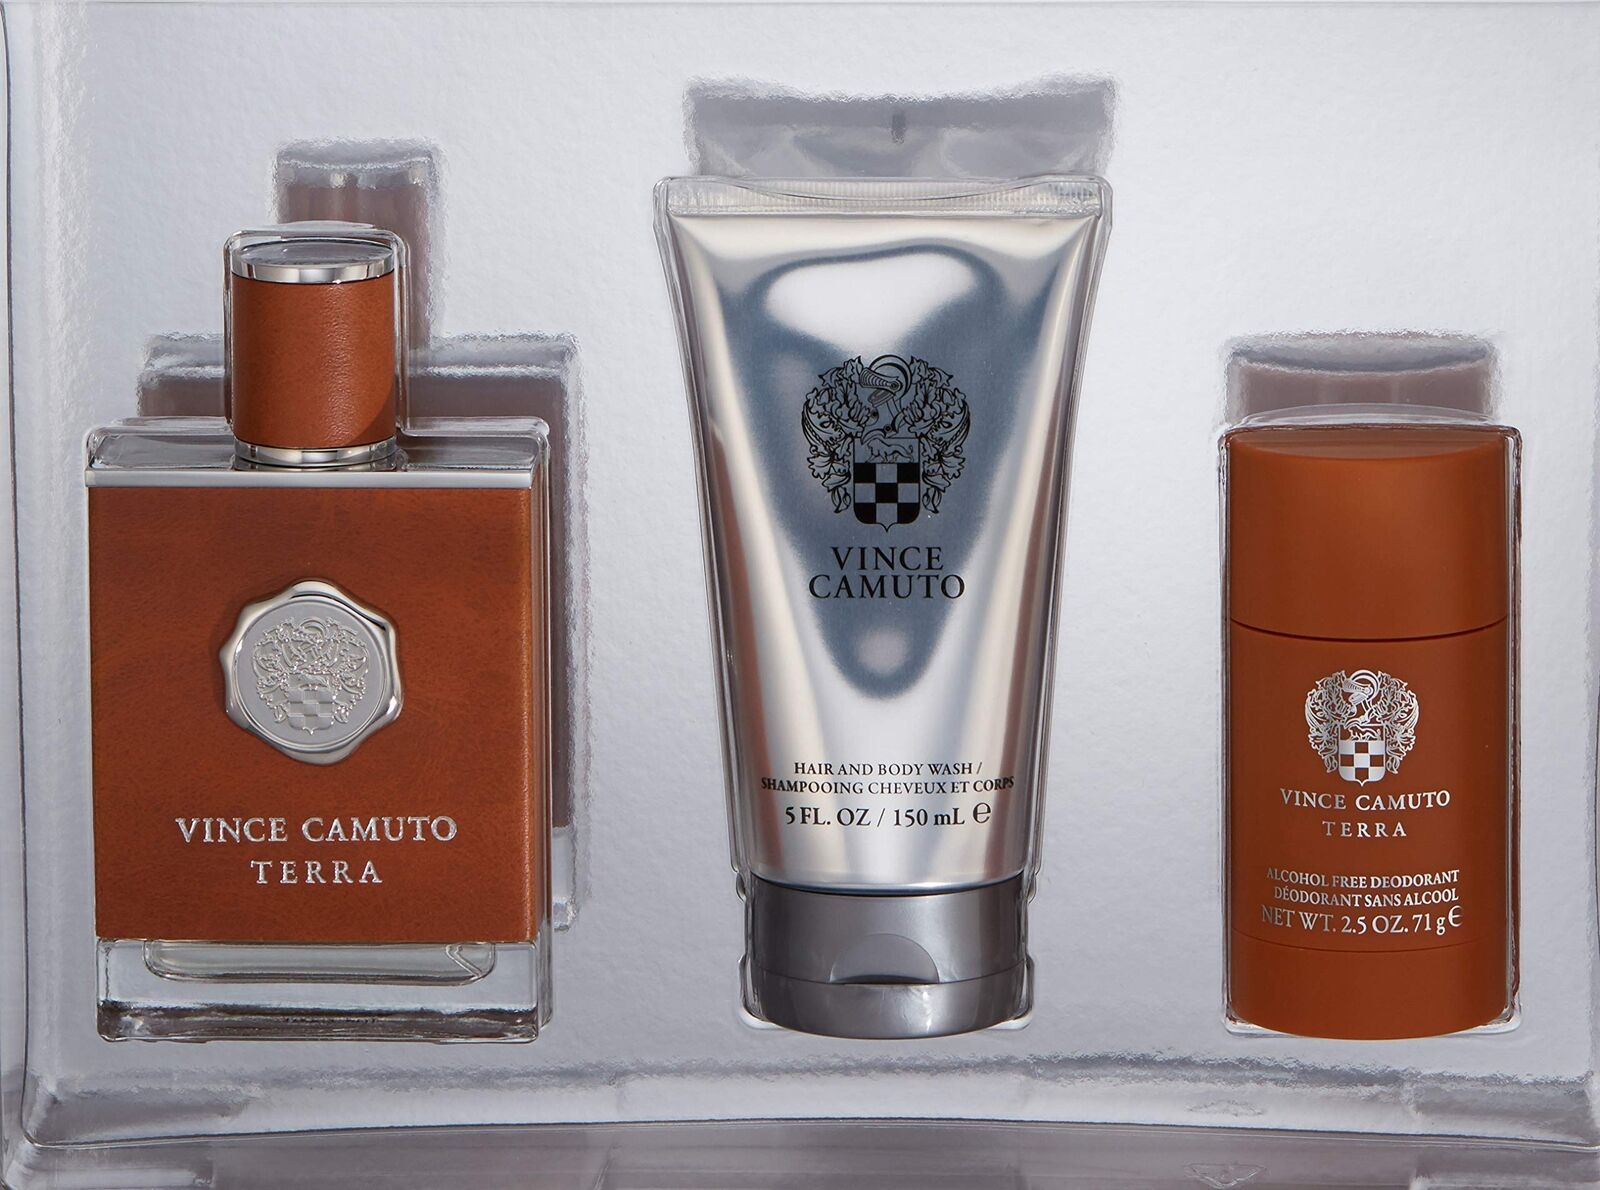 BRAND NEW VINCE CAMUTO TERRA COLOGNE FOR MEN 3 PC GIFT SET